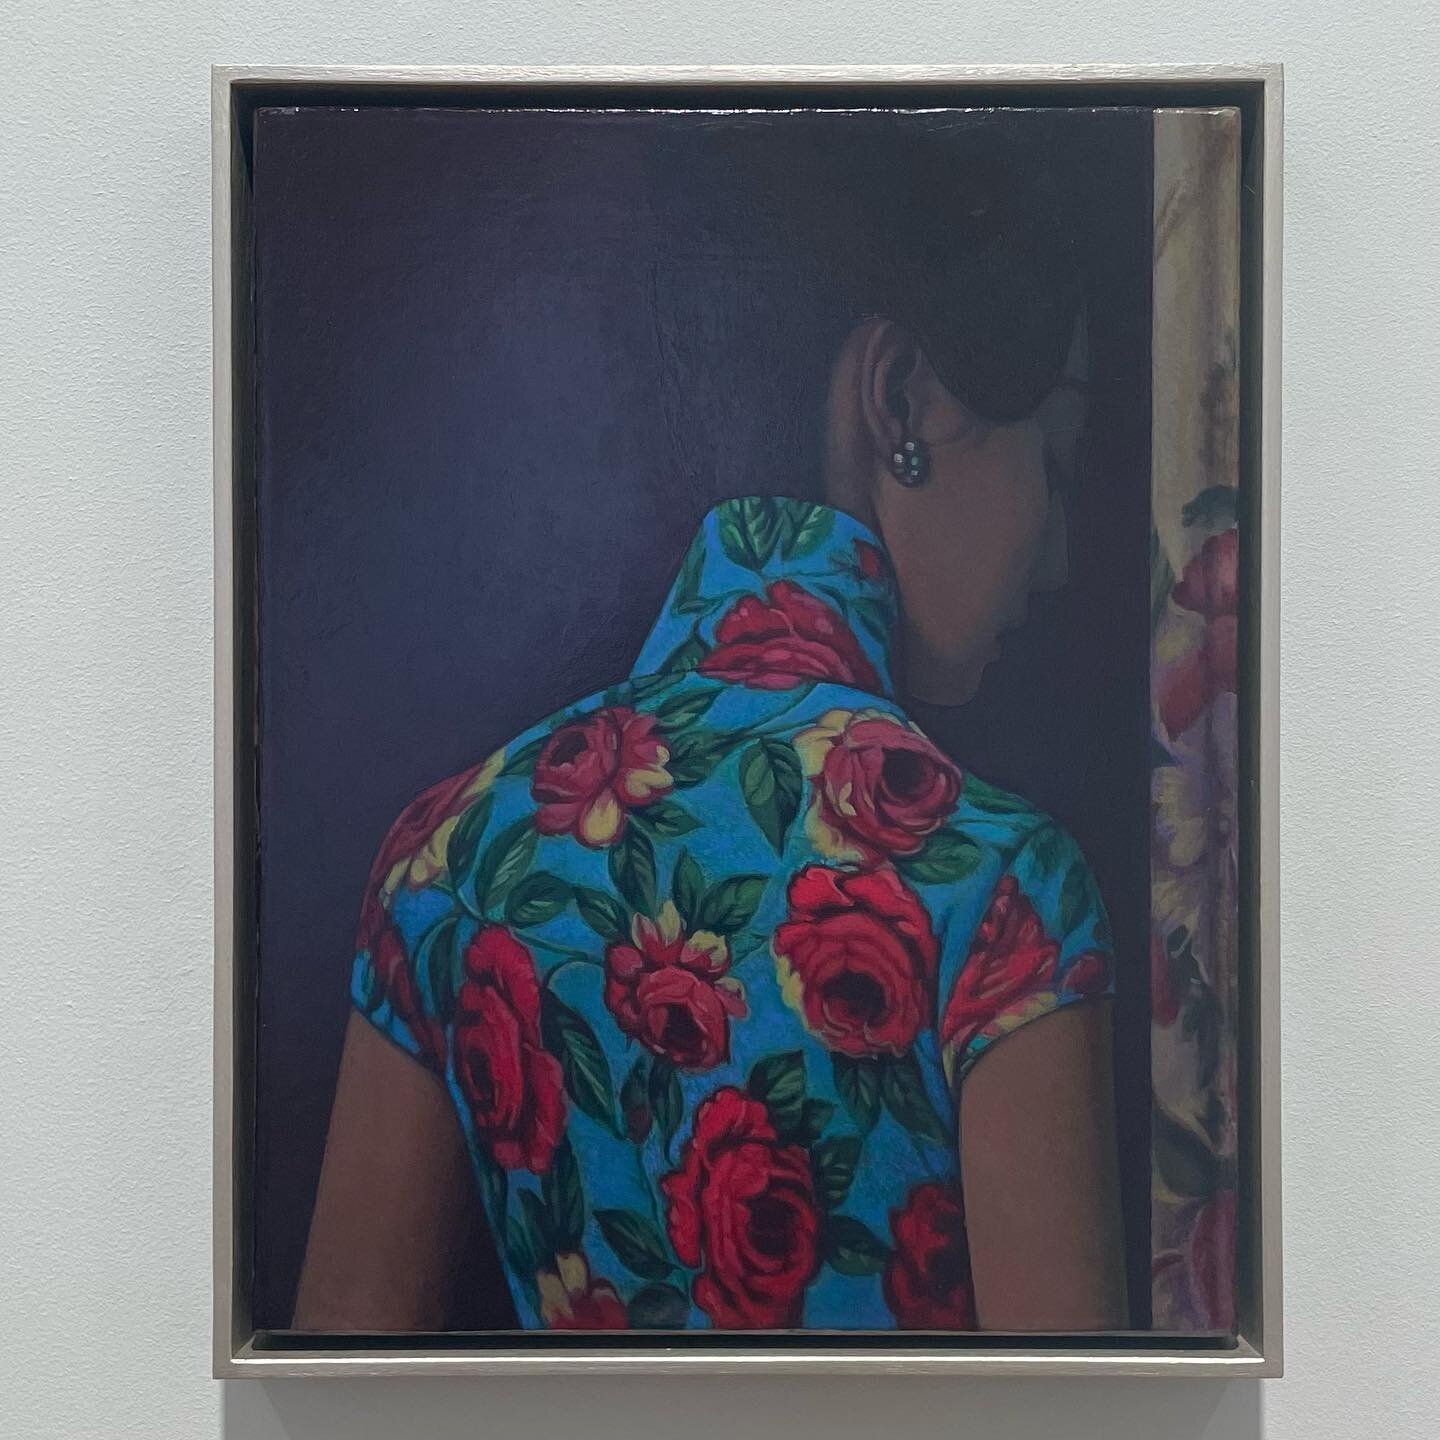 A few gallery shows from yesterday&rsquo;s walk through SOHO and Mayfair&hellip;⁣
⁣
Liu Ye&rsquo;s show, &ldquo;Naive and Sentimental Painting,&rdquo; opened last night at David Zwirner. Filled with portraits of writers, fictional characters, pets an